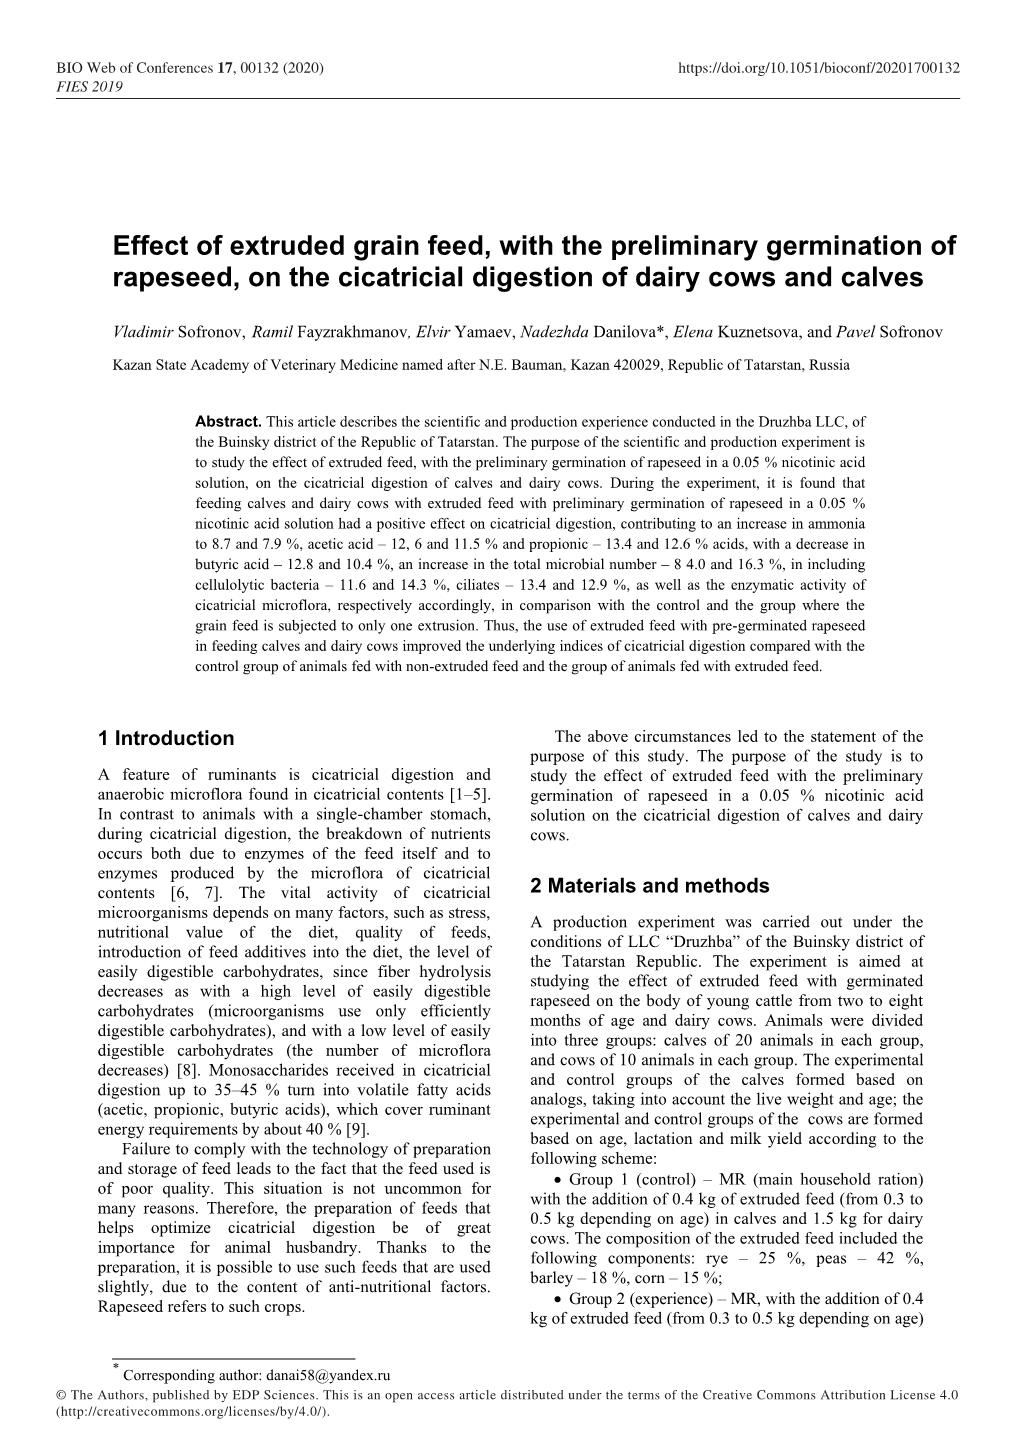 Effect of Extruded Grain Feed, with the Preliminary Germination of Rapeseed, on the Cicatricial Digestion of Dairy Cows and Calves